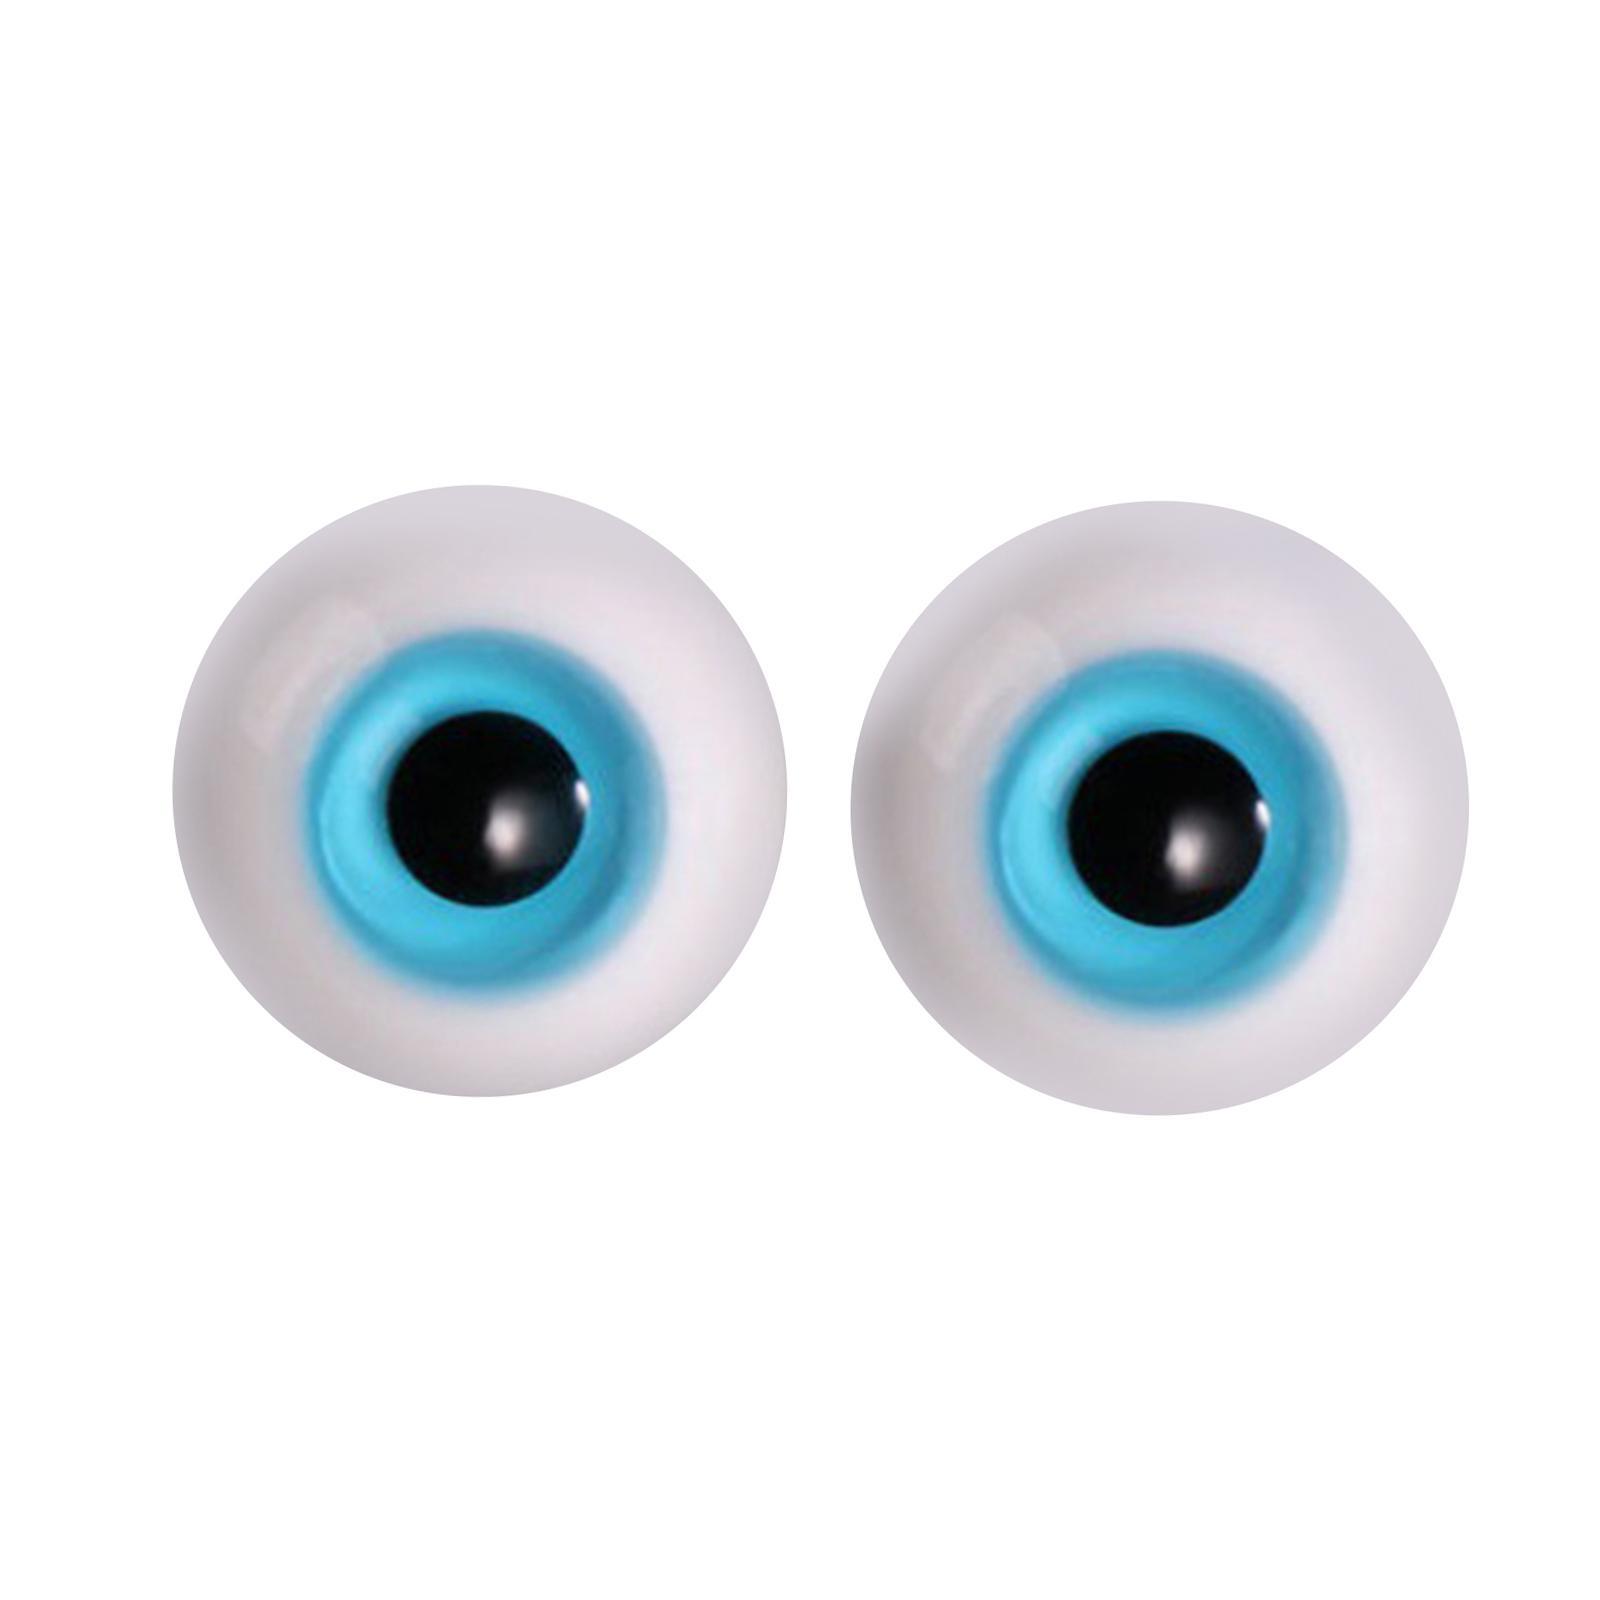 2x Doll Eyes Wiggle Eyes for Halloween Props Sculpture Doll